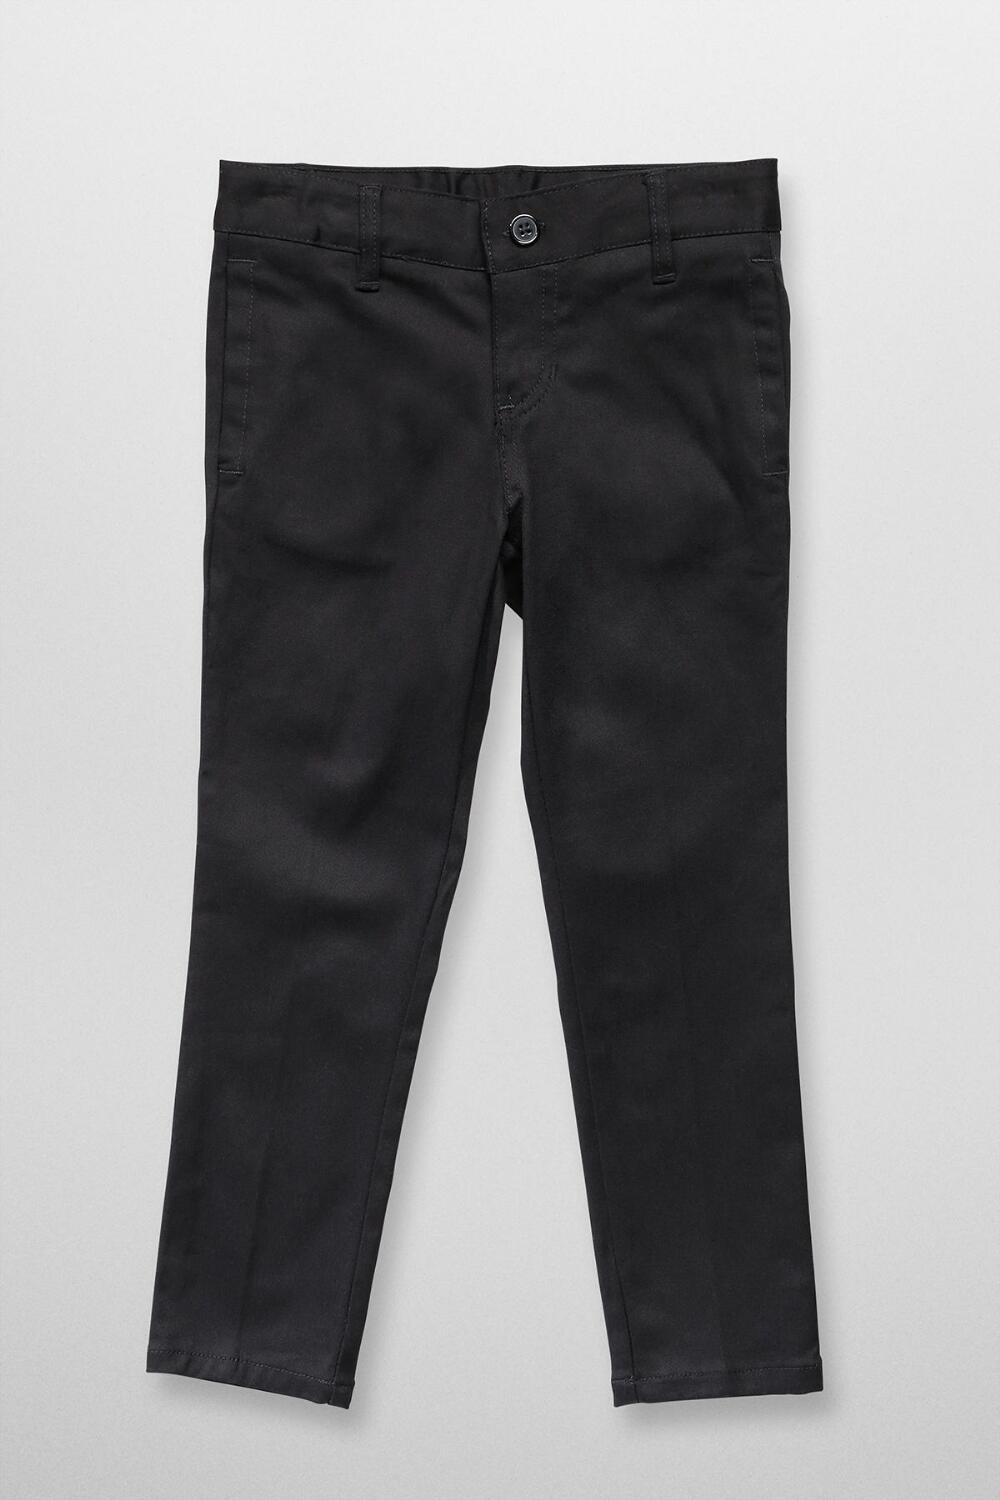 At School by French Toast Skinny Stretch Twill Pant